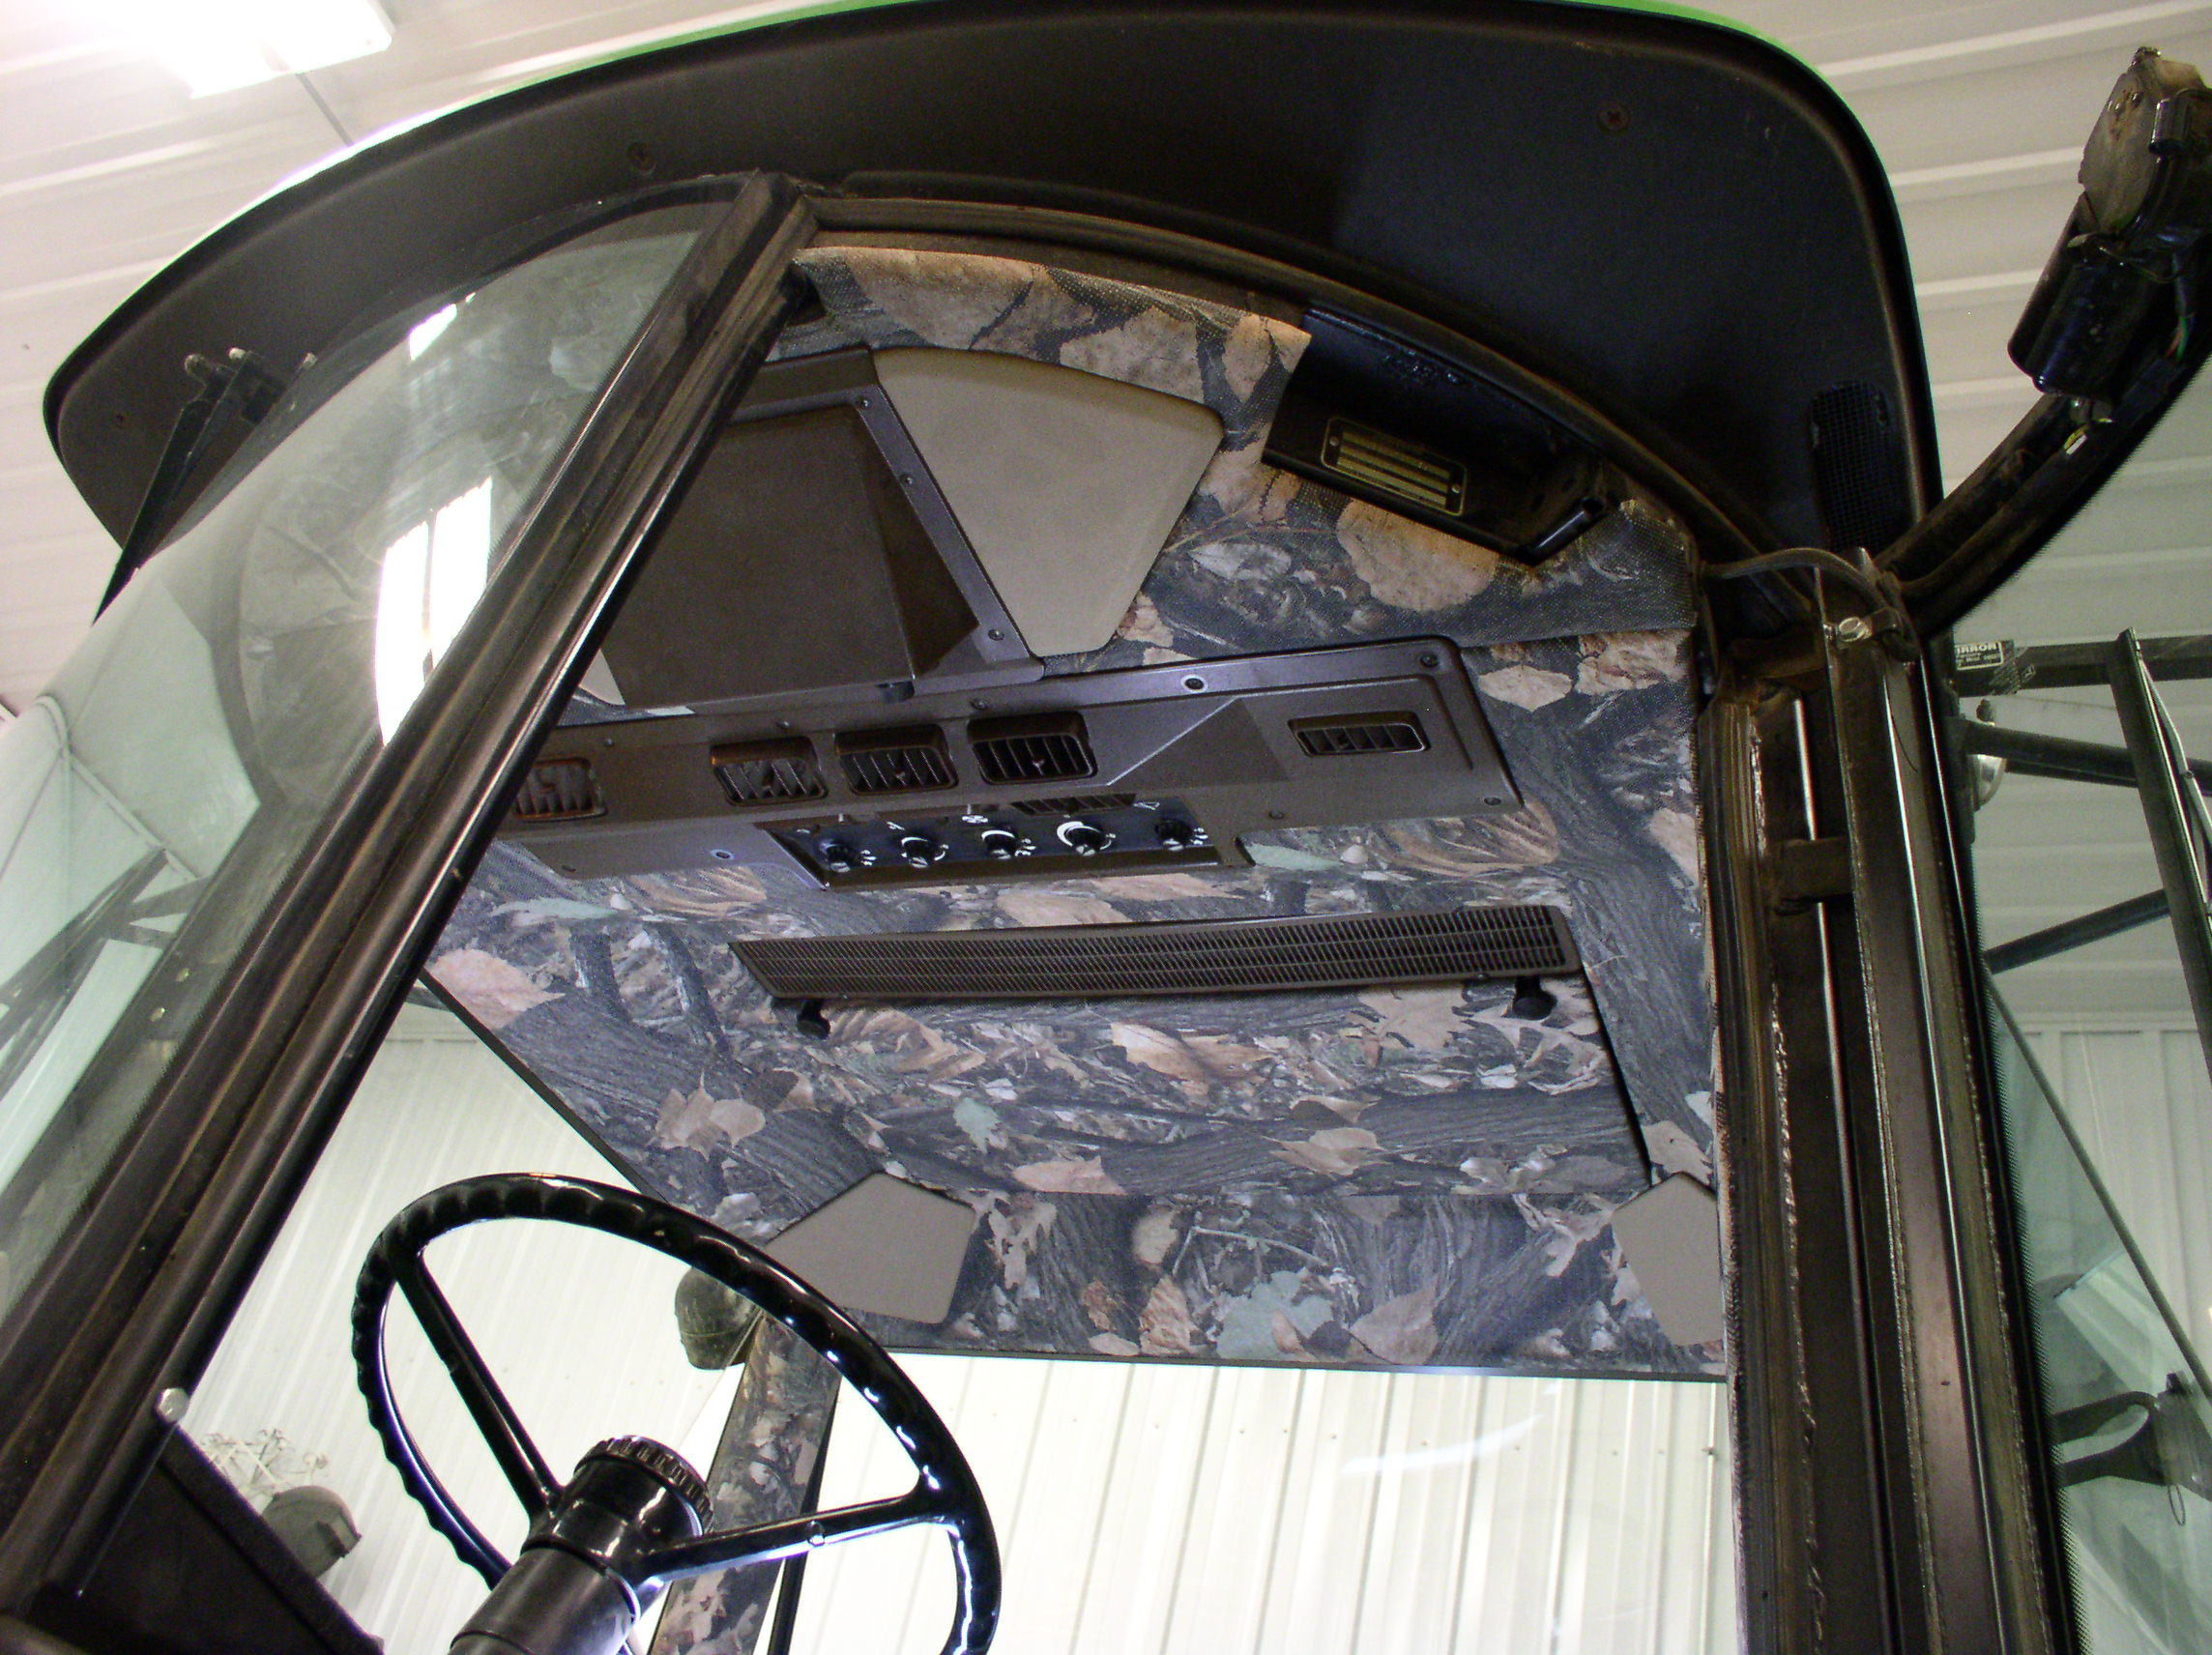 Camouflage Cab Kits A New Option To Personalize Your Tractor Interior Tractor Interior 9560